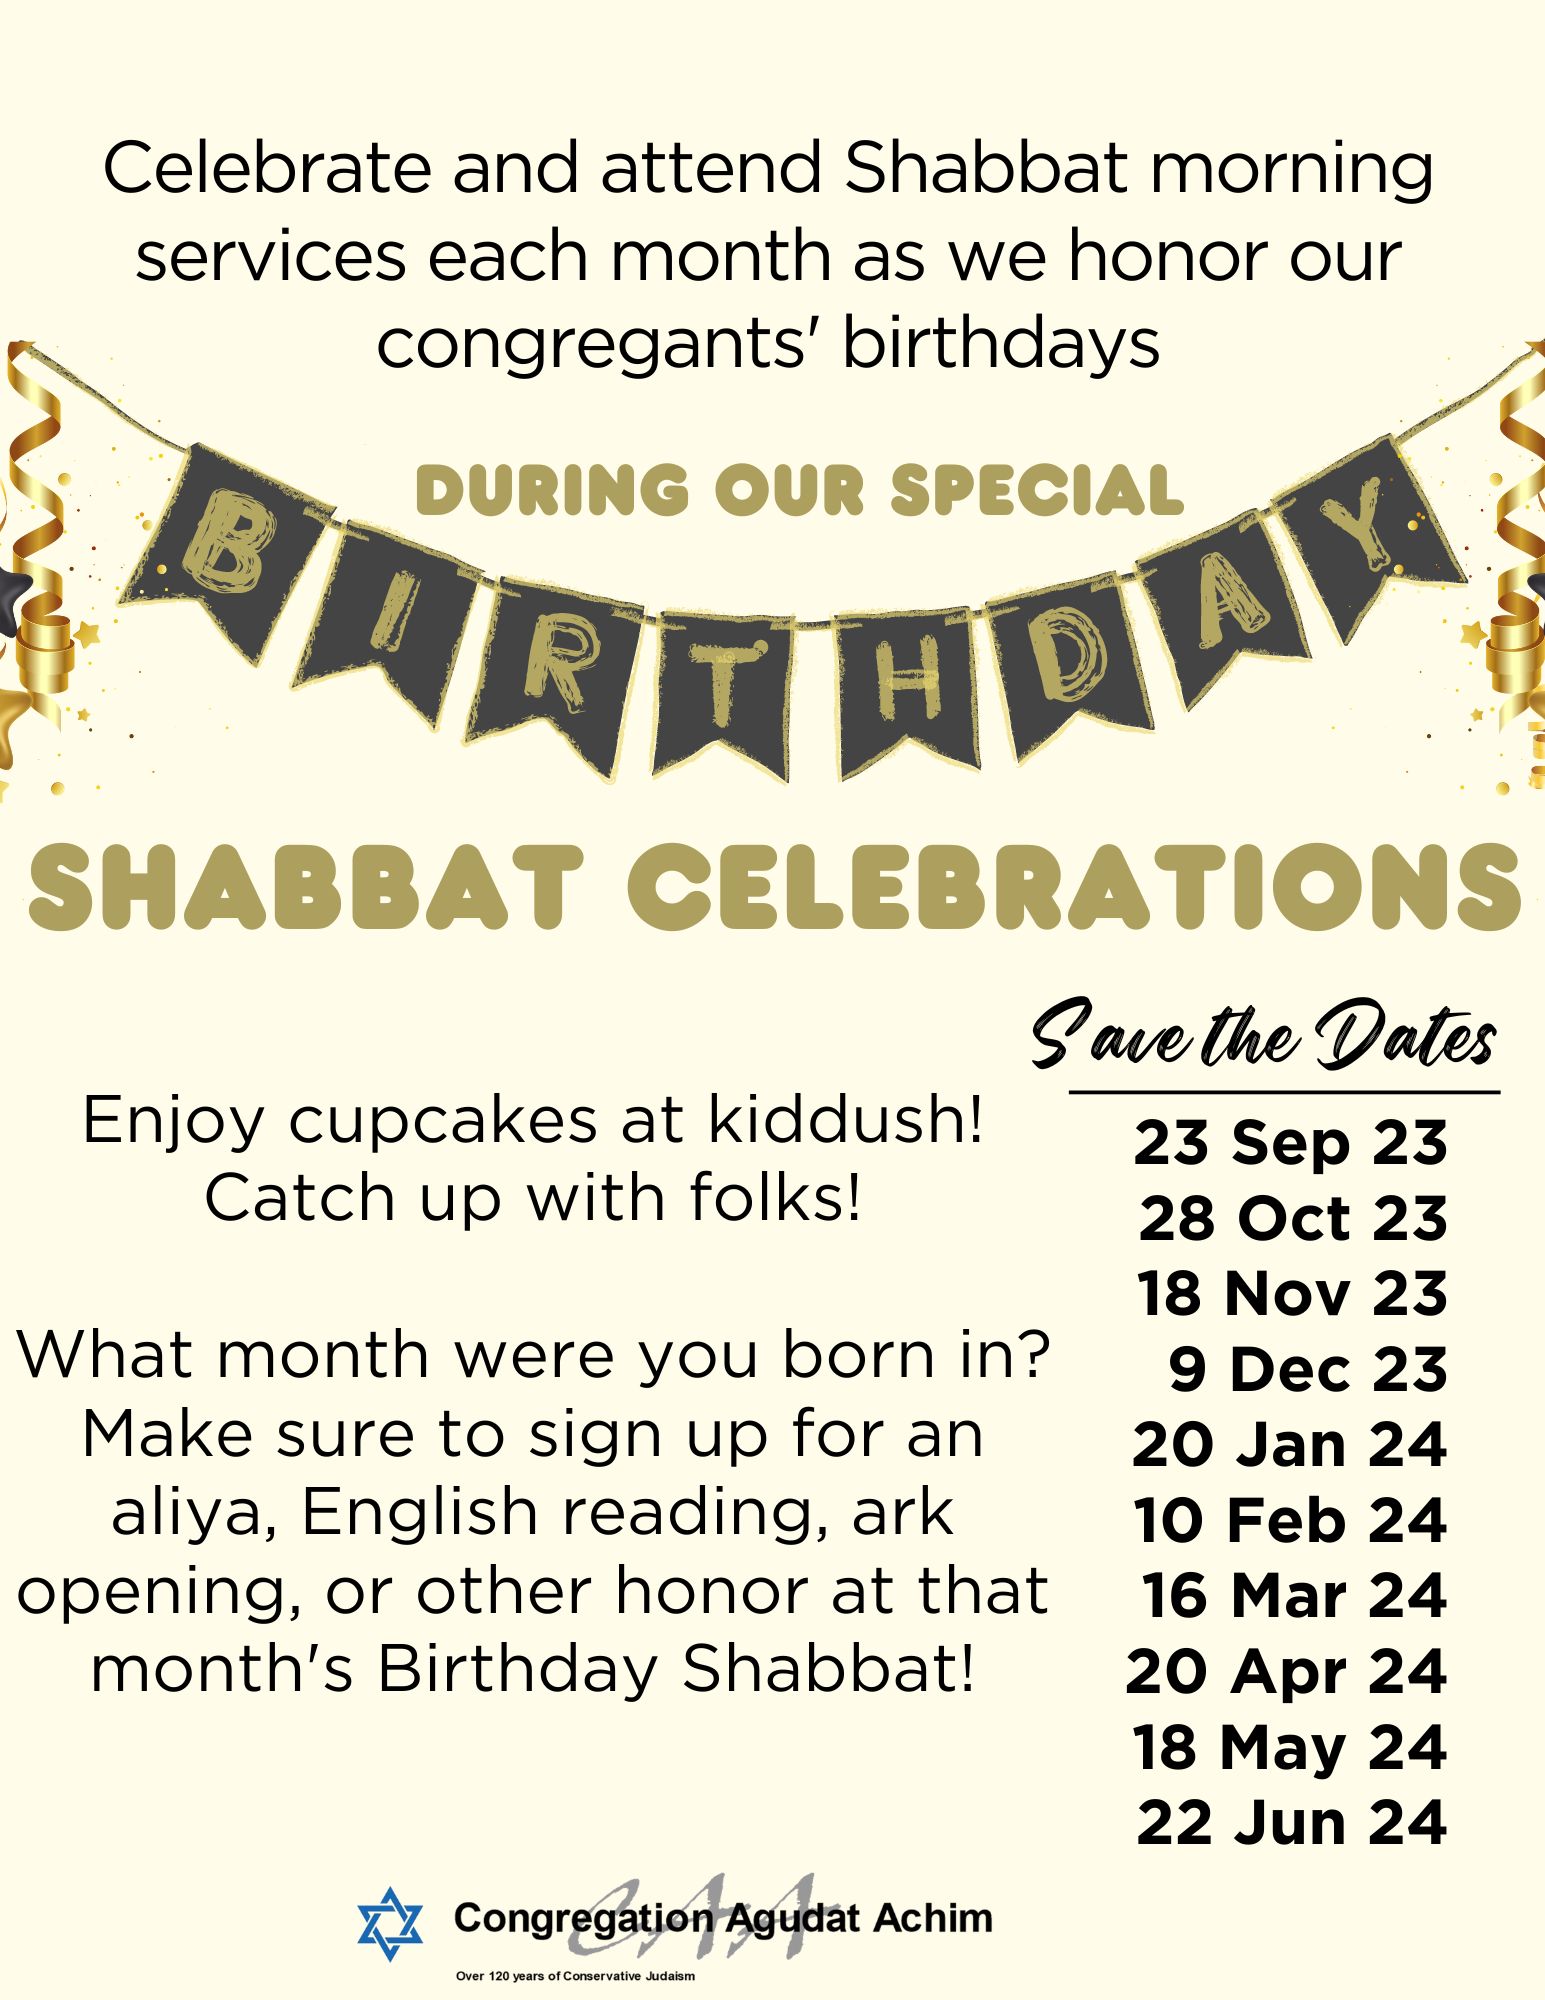 Celebrate and attend Shabbat morning services each month as we honor our congregants' birthdays